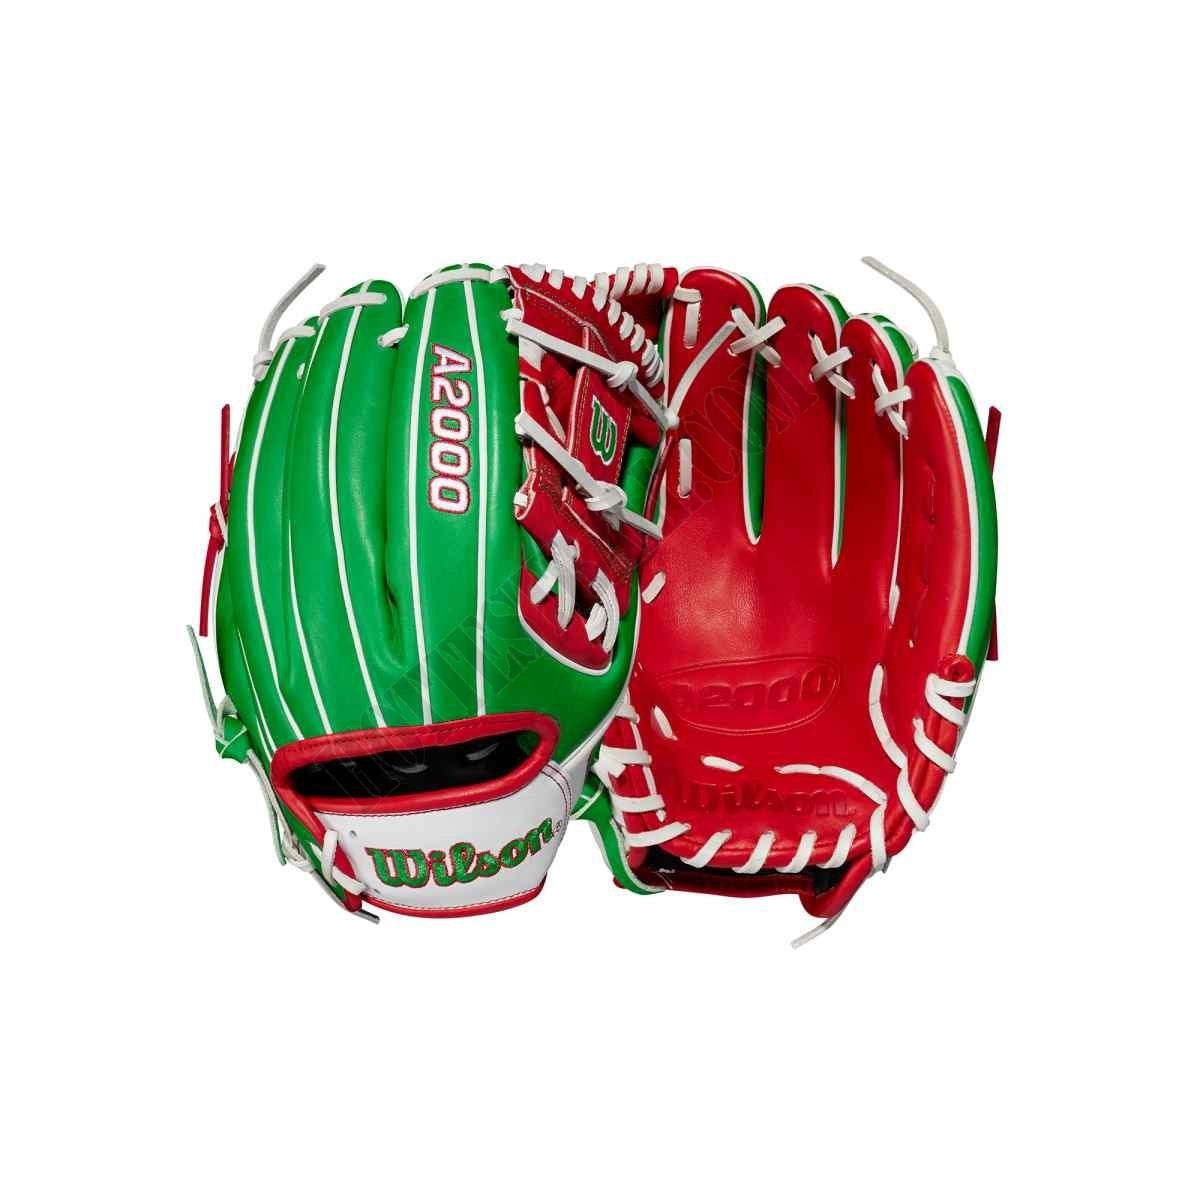 2021 A2000 1786 Mexico 11.5" Infield Baseball Glove - Limited Edition ● Wilson Promotions - -0